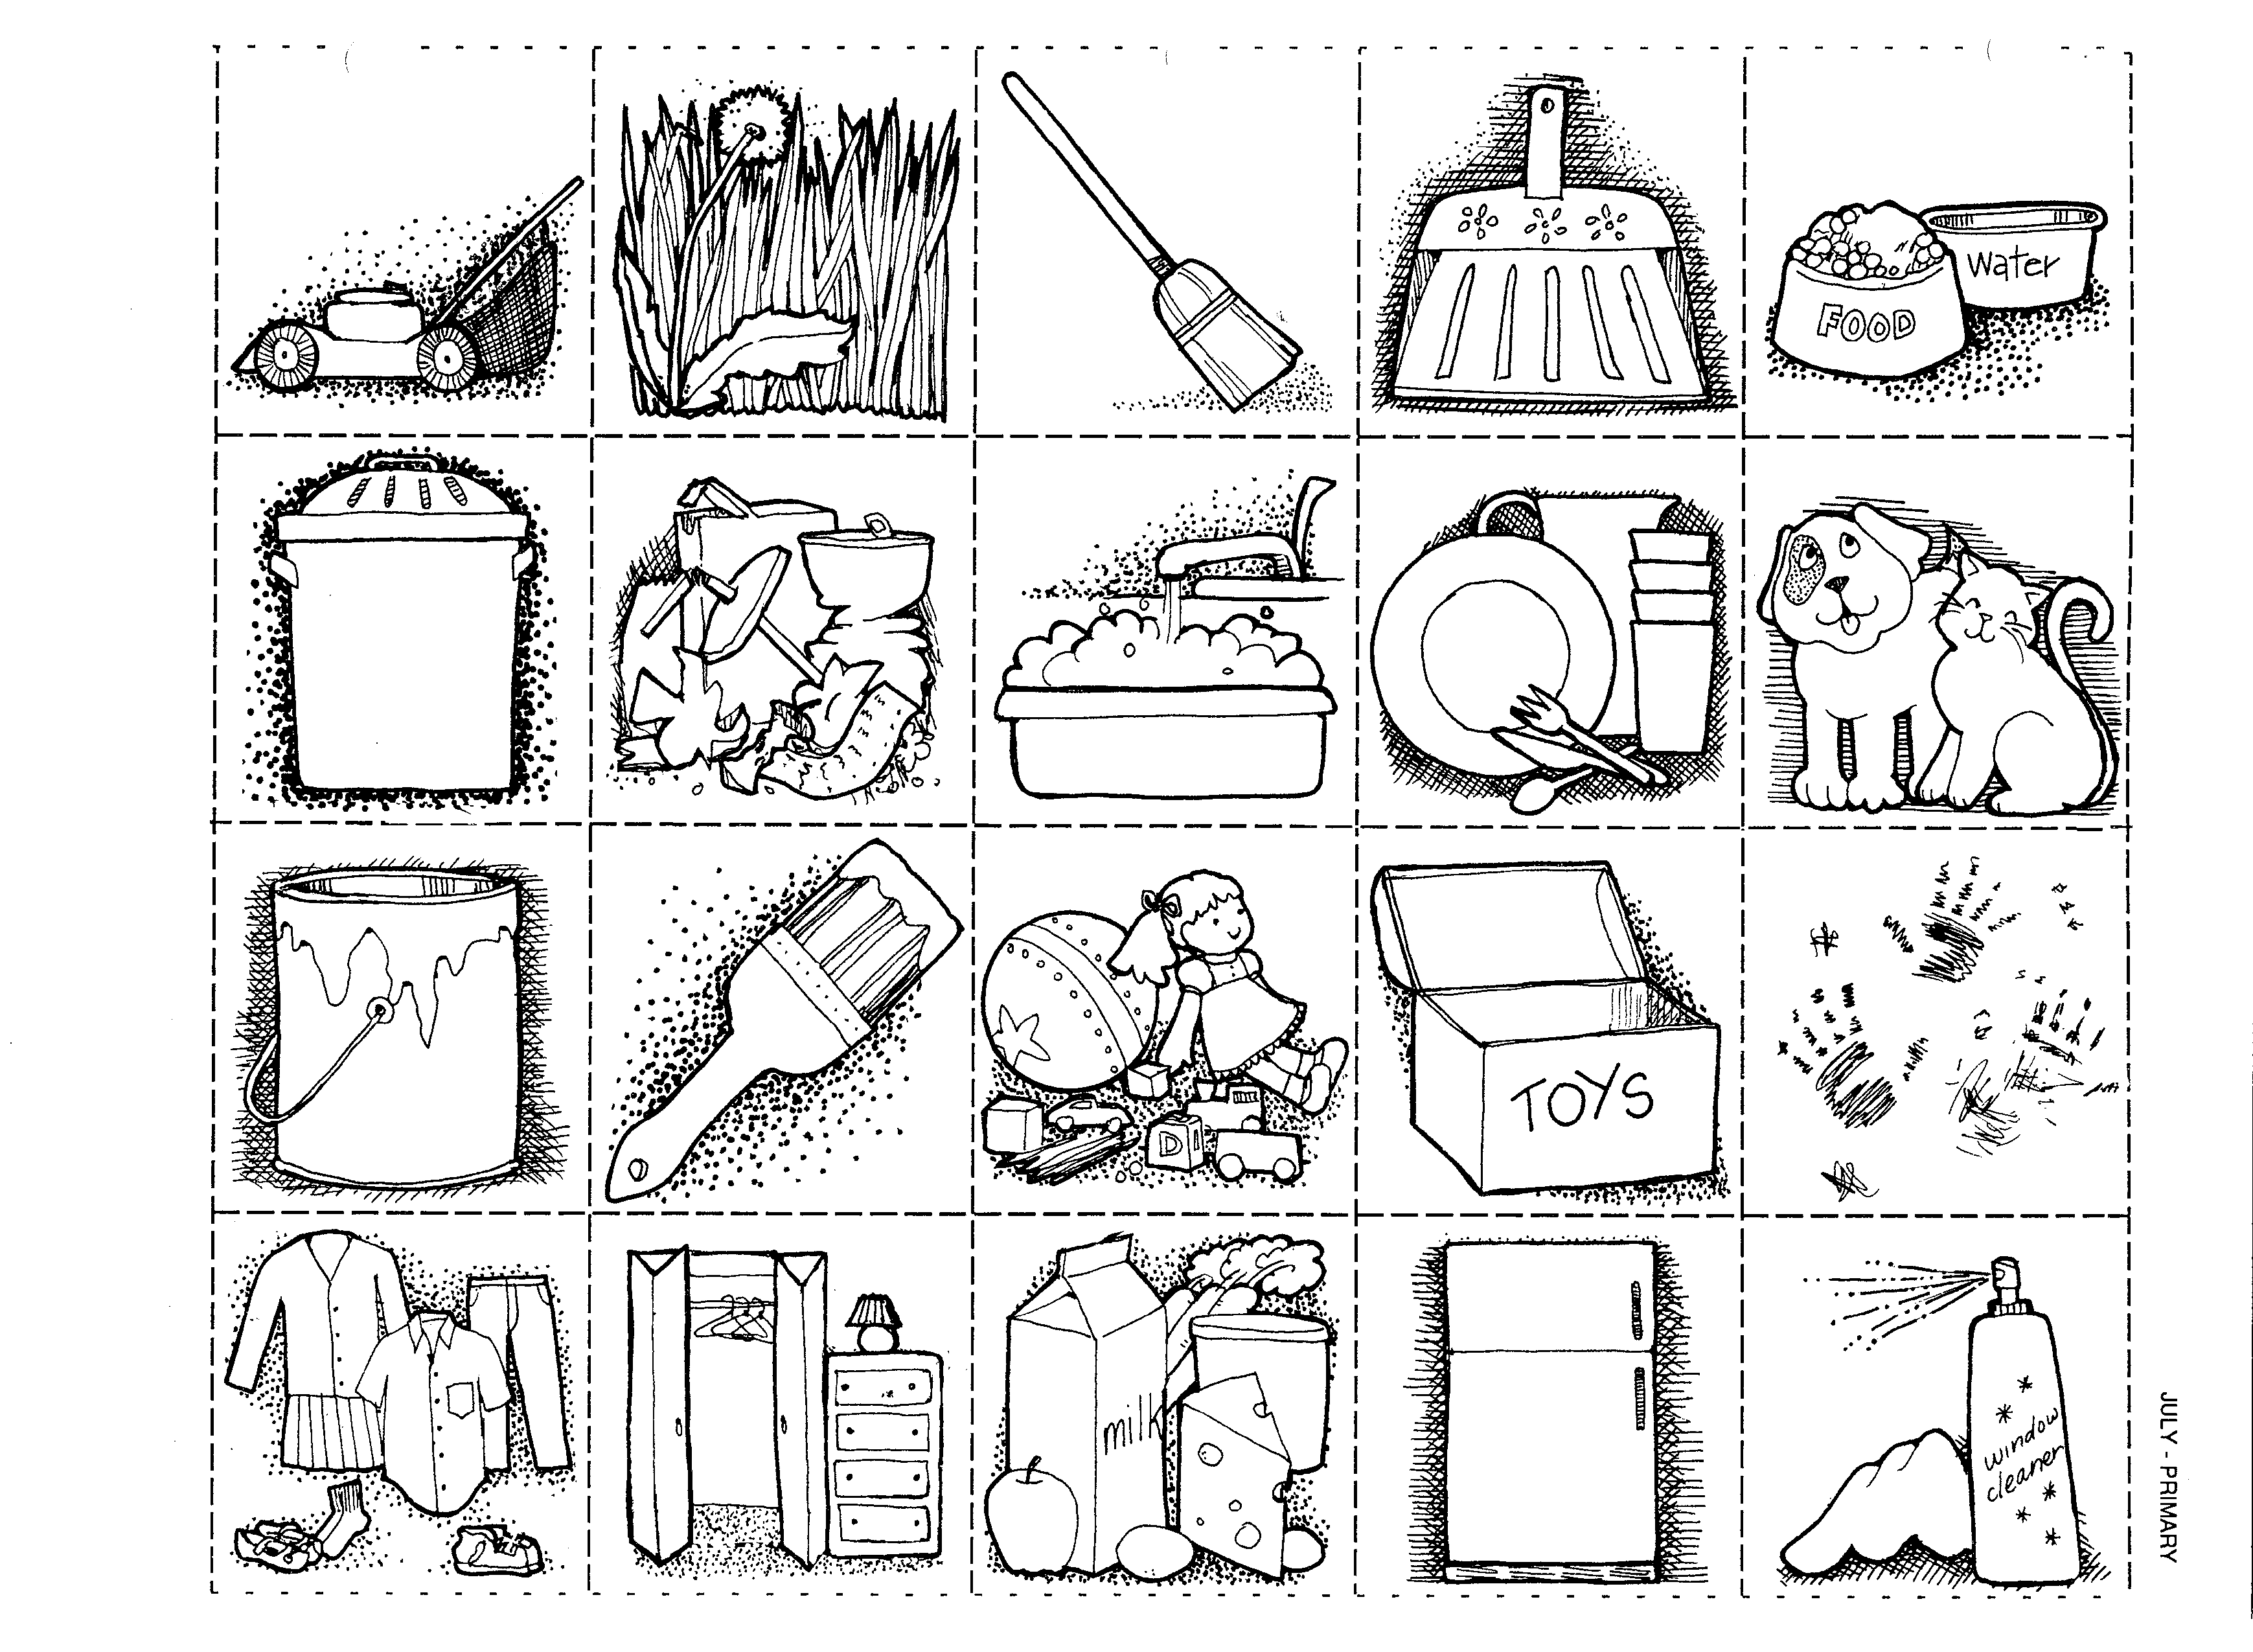 chores clipart household activity